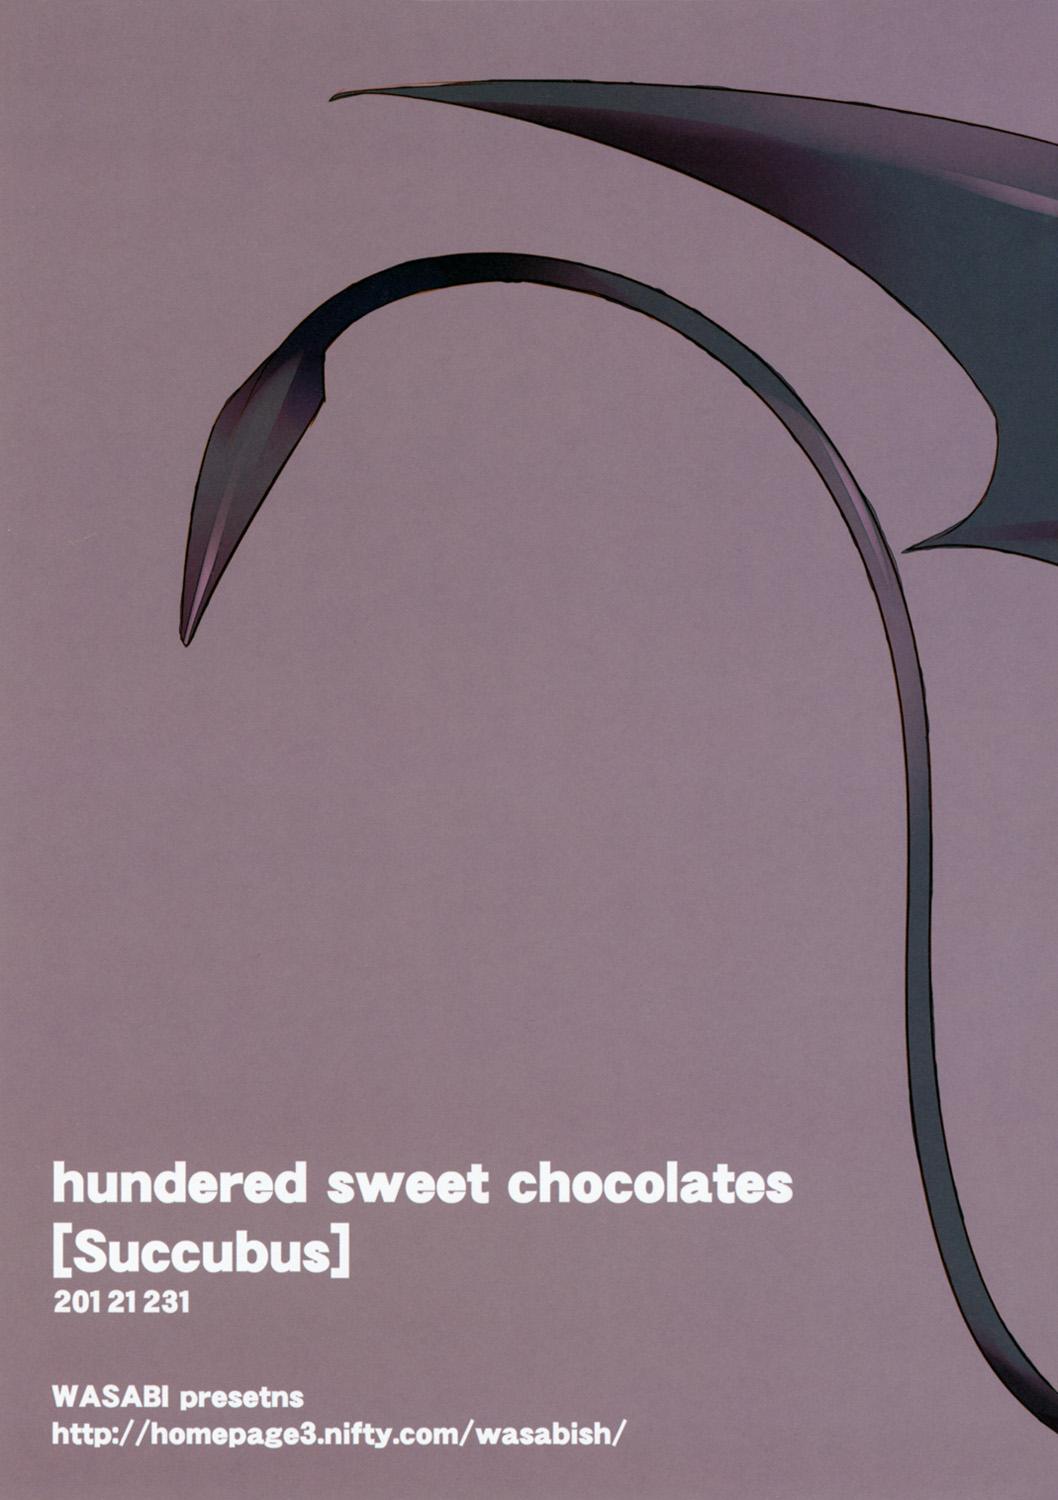 Outdoor hundred sweet chocolates Van - Page 11